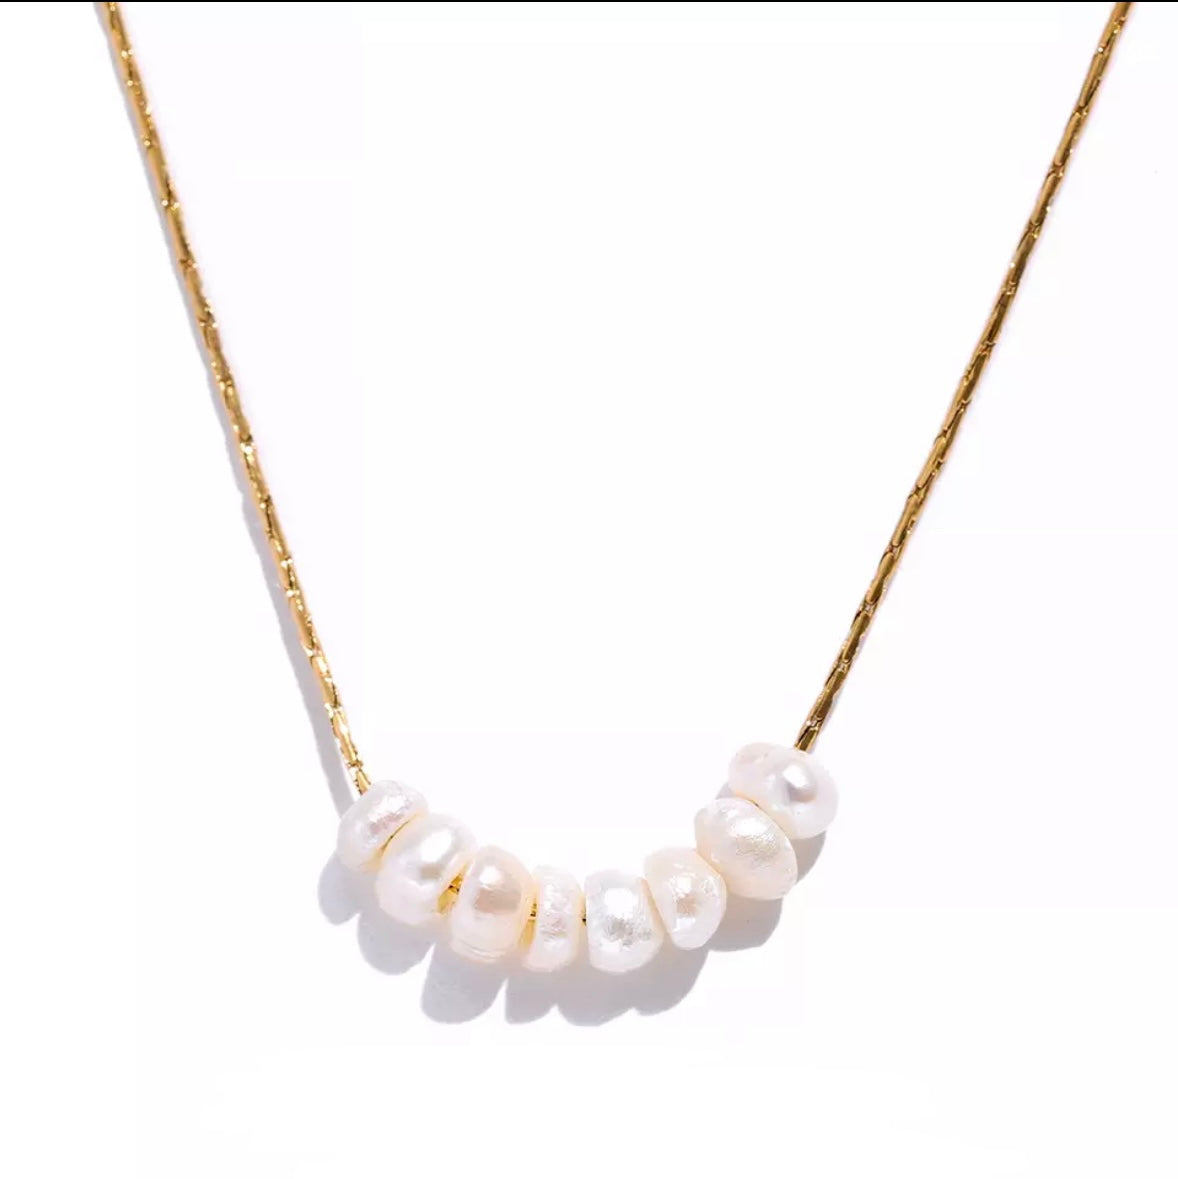 Stunning 18K gold dainty real pearl choker necklace for women in Australia